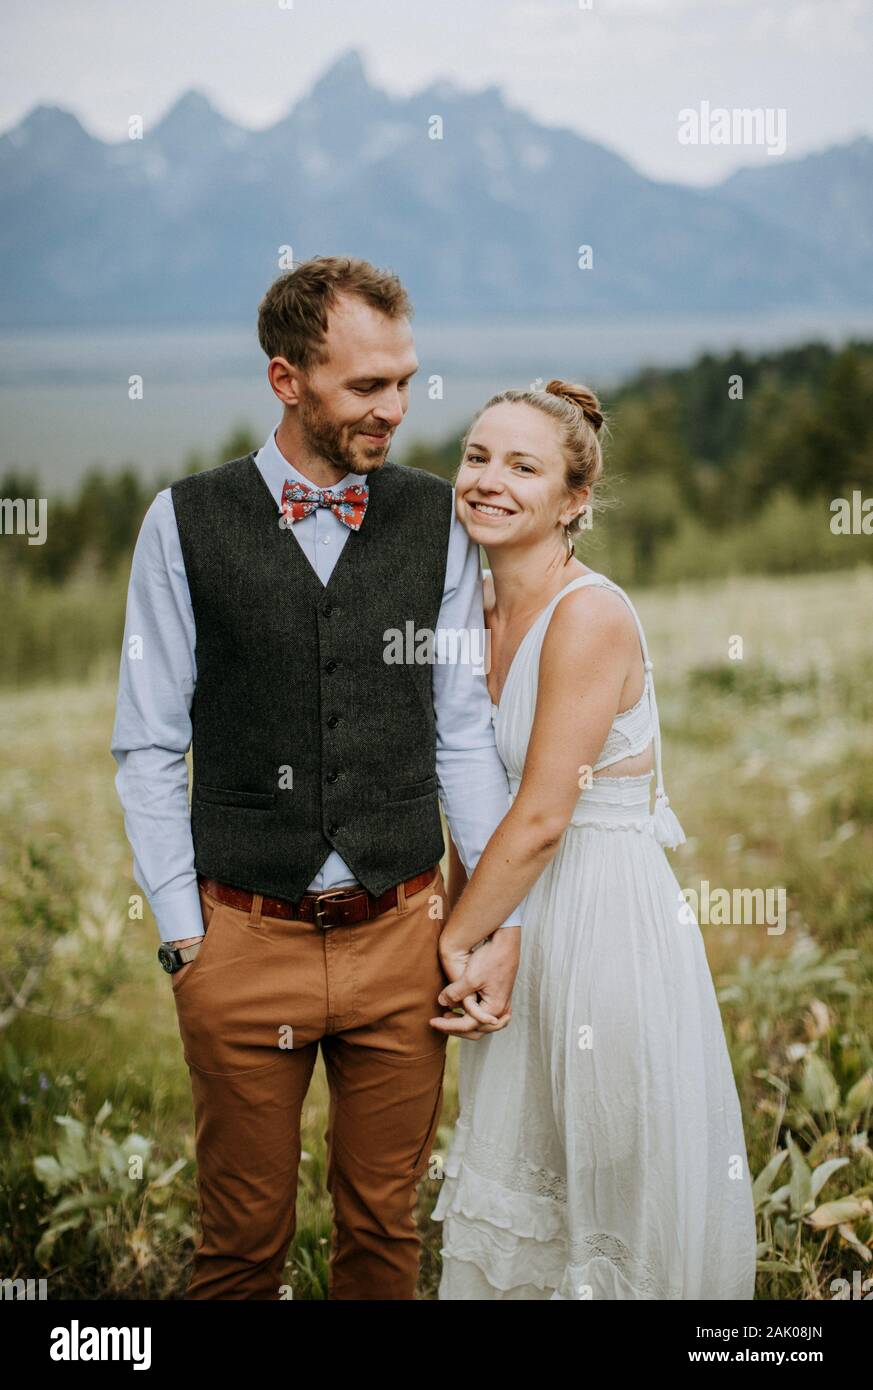 Newlywed bride and groom hold each other in field of flowers Stock Photo